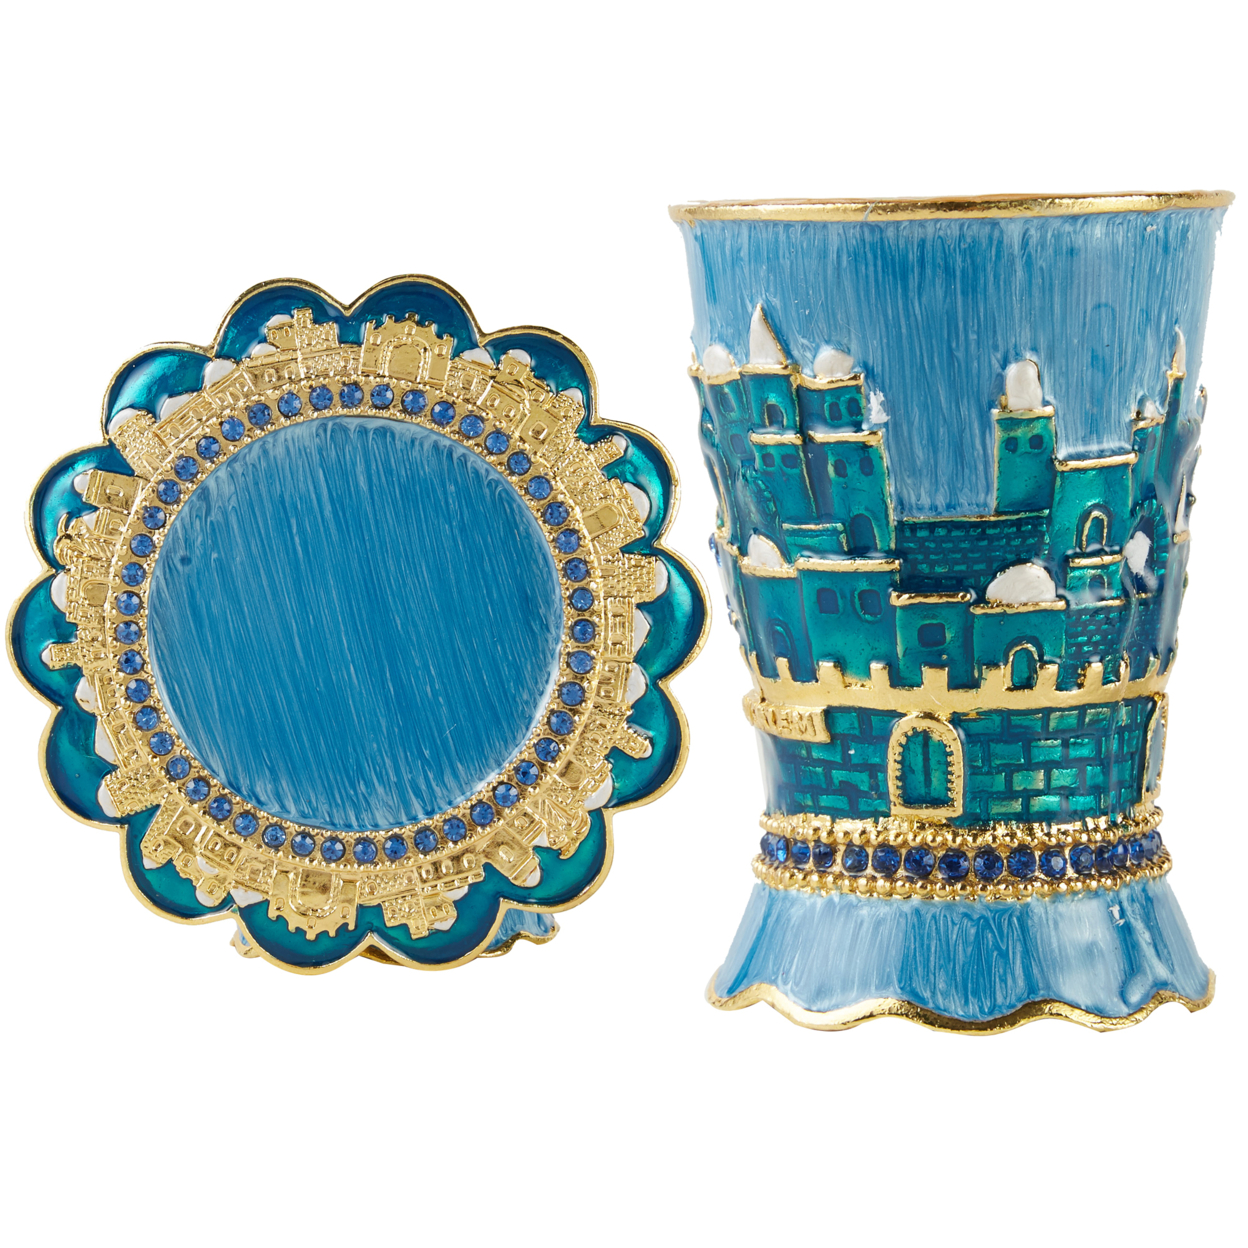 Matashi Hand-Painted Enamel 3.3'' Tall Kiddush Cup Set & Tray W Crystals & Jerusalem Cityscape Design Goblet, Judaica Gift, Blessings Cup